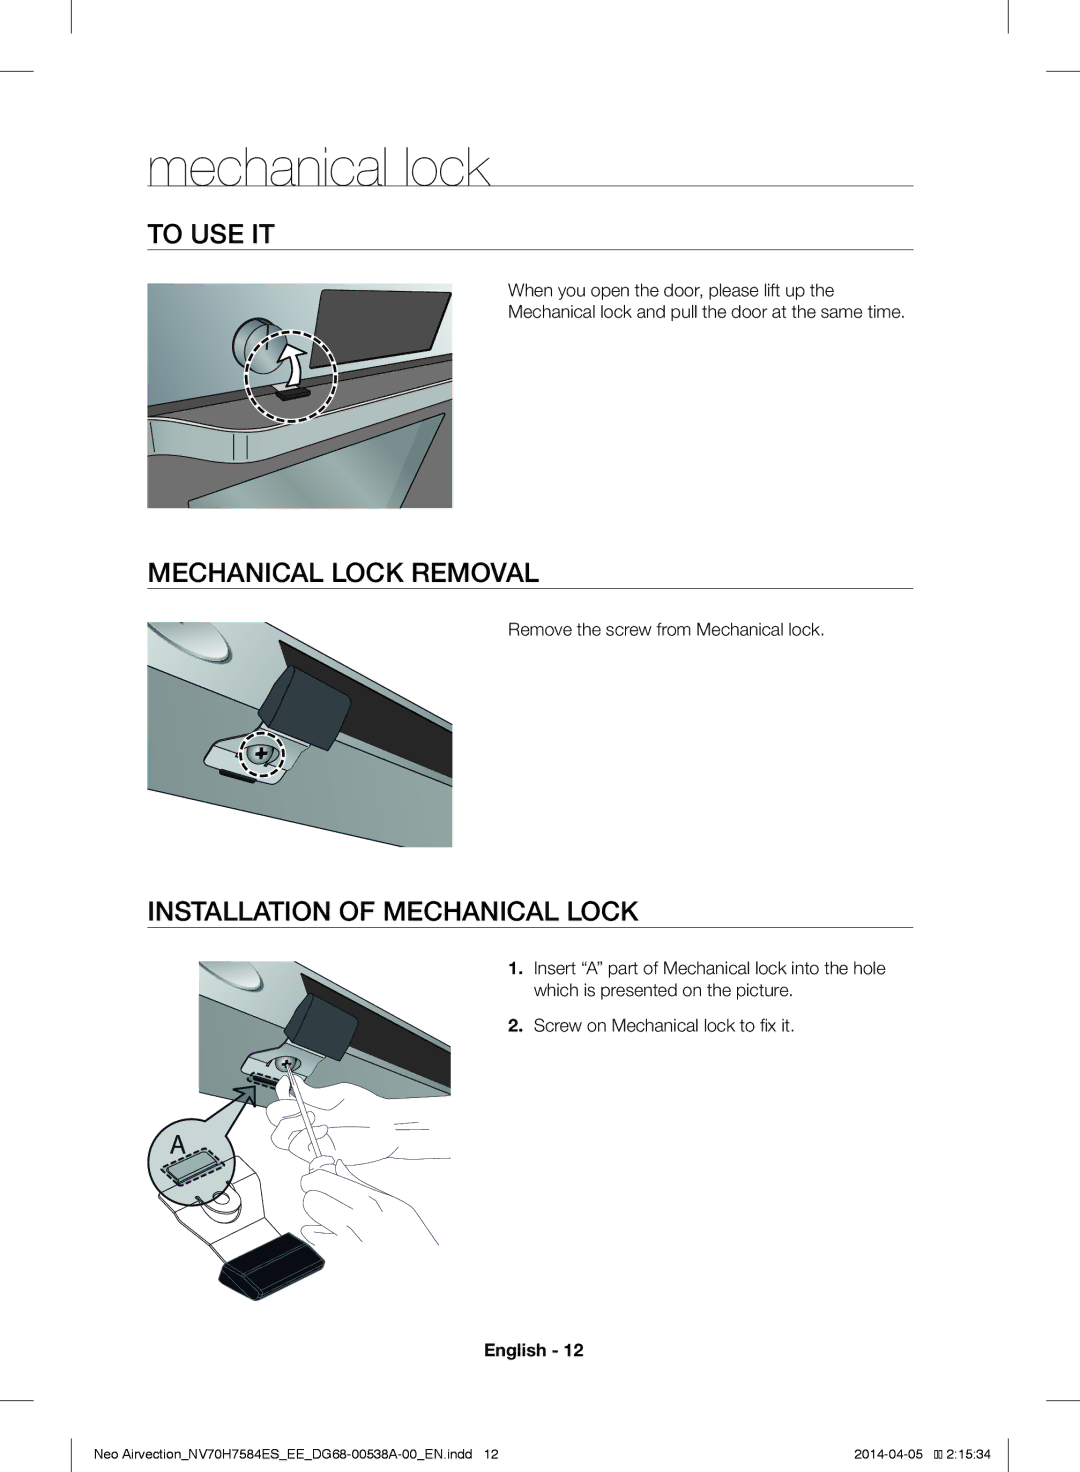 Samsung NV70H7584ES/EE manual Mechanical lock, To USE IT, Mechanical Lock Removal, Installation of Mechanical Lock 